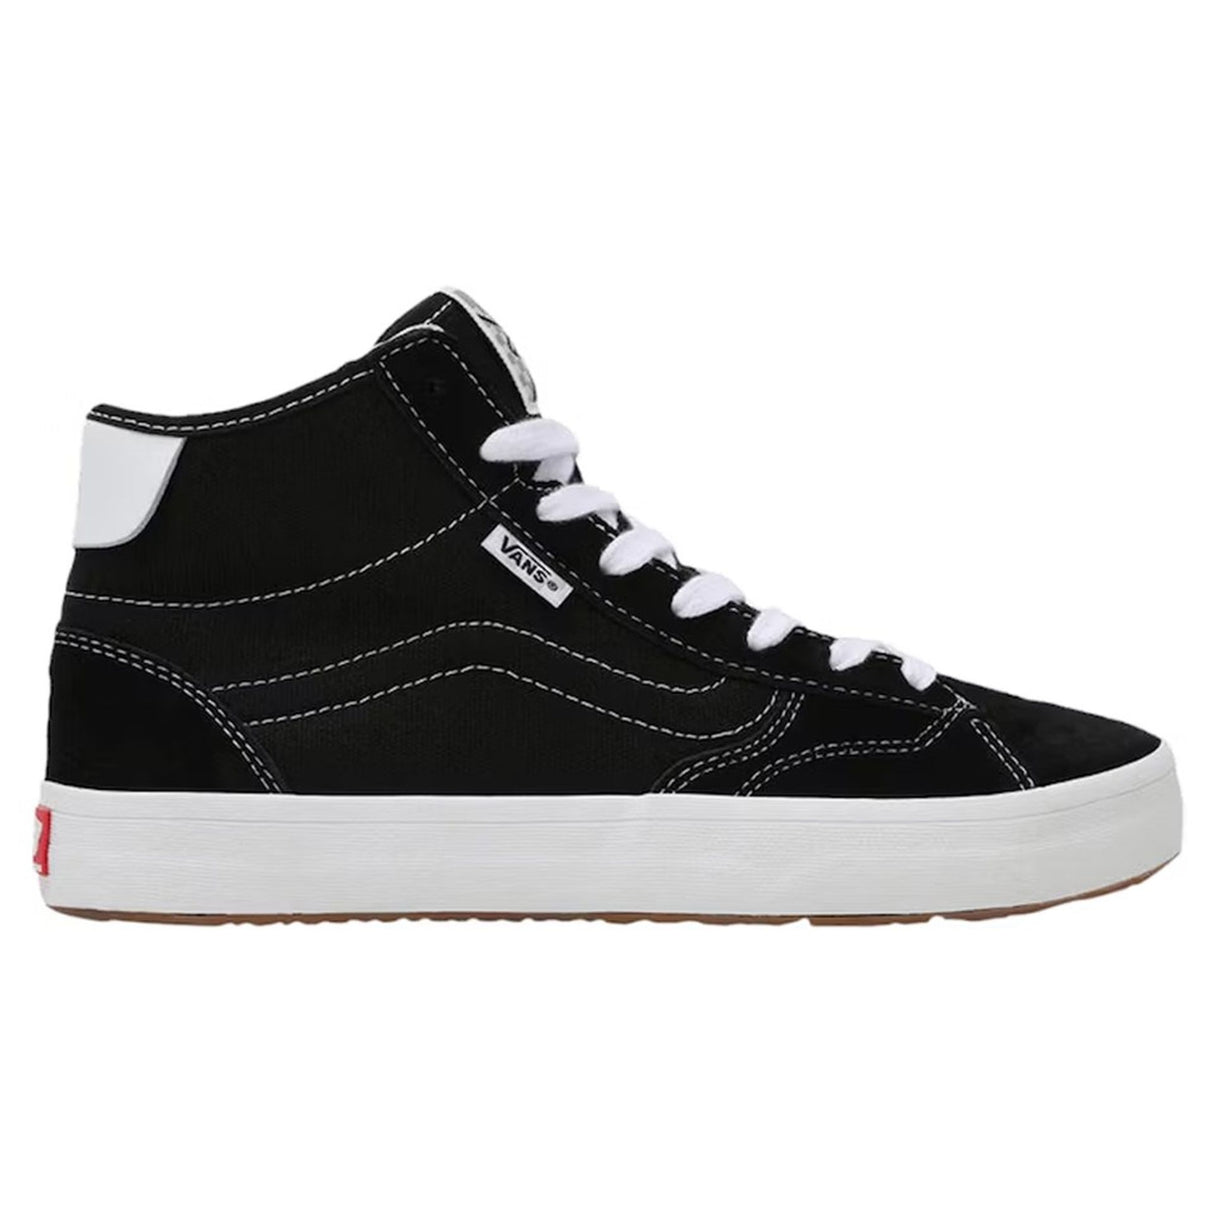 Men's Fabric Leather Sneakers Fabric and Leather Upper Sneakers Metal Eyelet Sneakers for Men Round Toe Sneakers with Leather Fabric Lining Men's Sneakers Rubber Sole Leather Sneakers Casual Fabric Leather Sneakers Stylish Men's Fabric Leather Sneakers